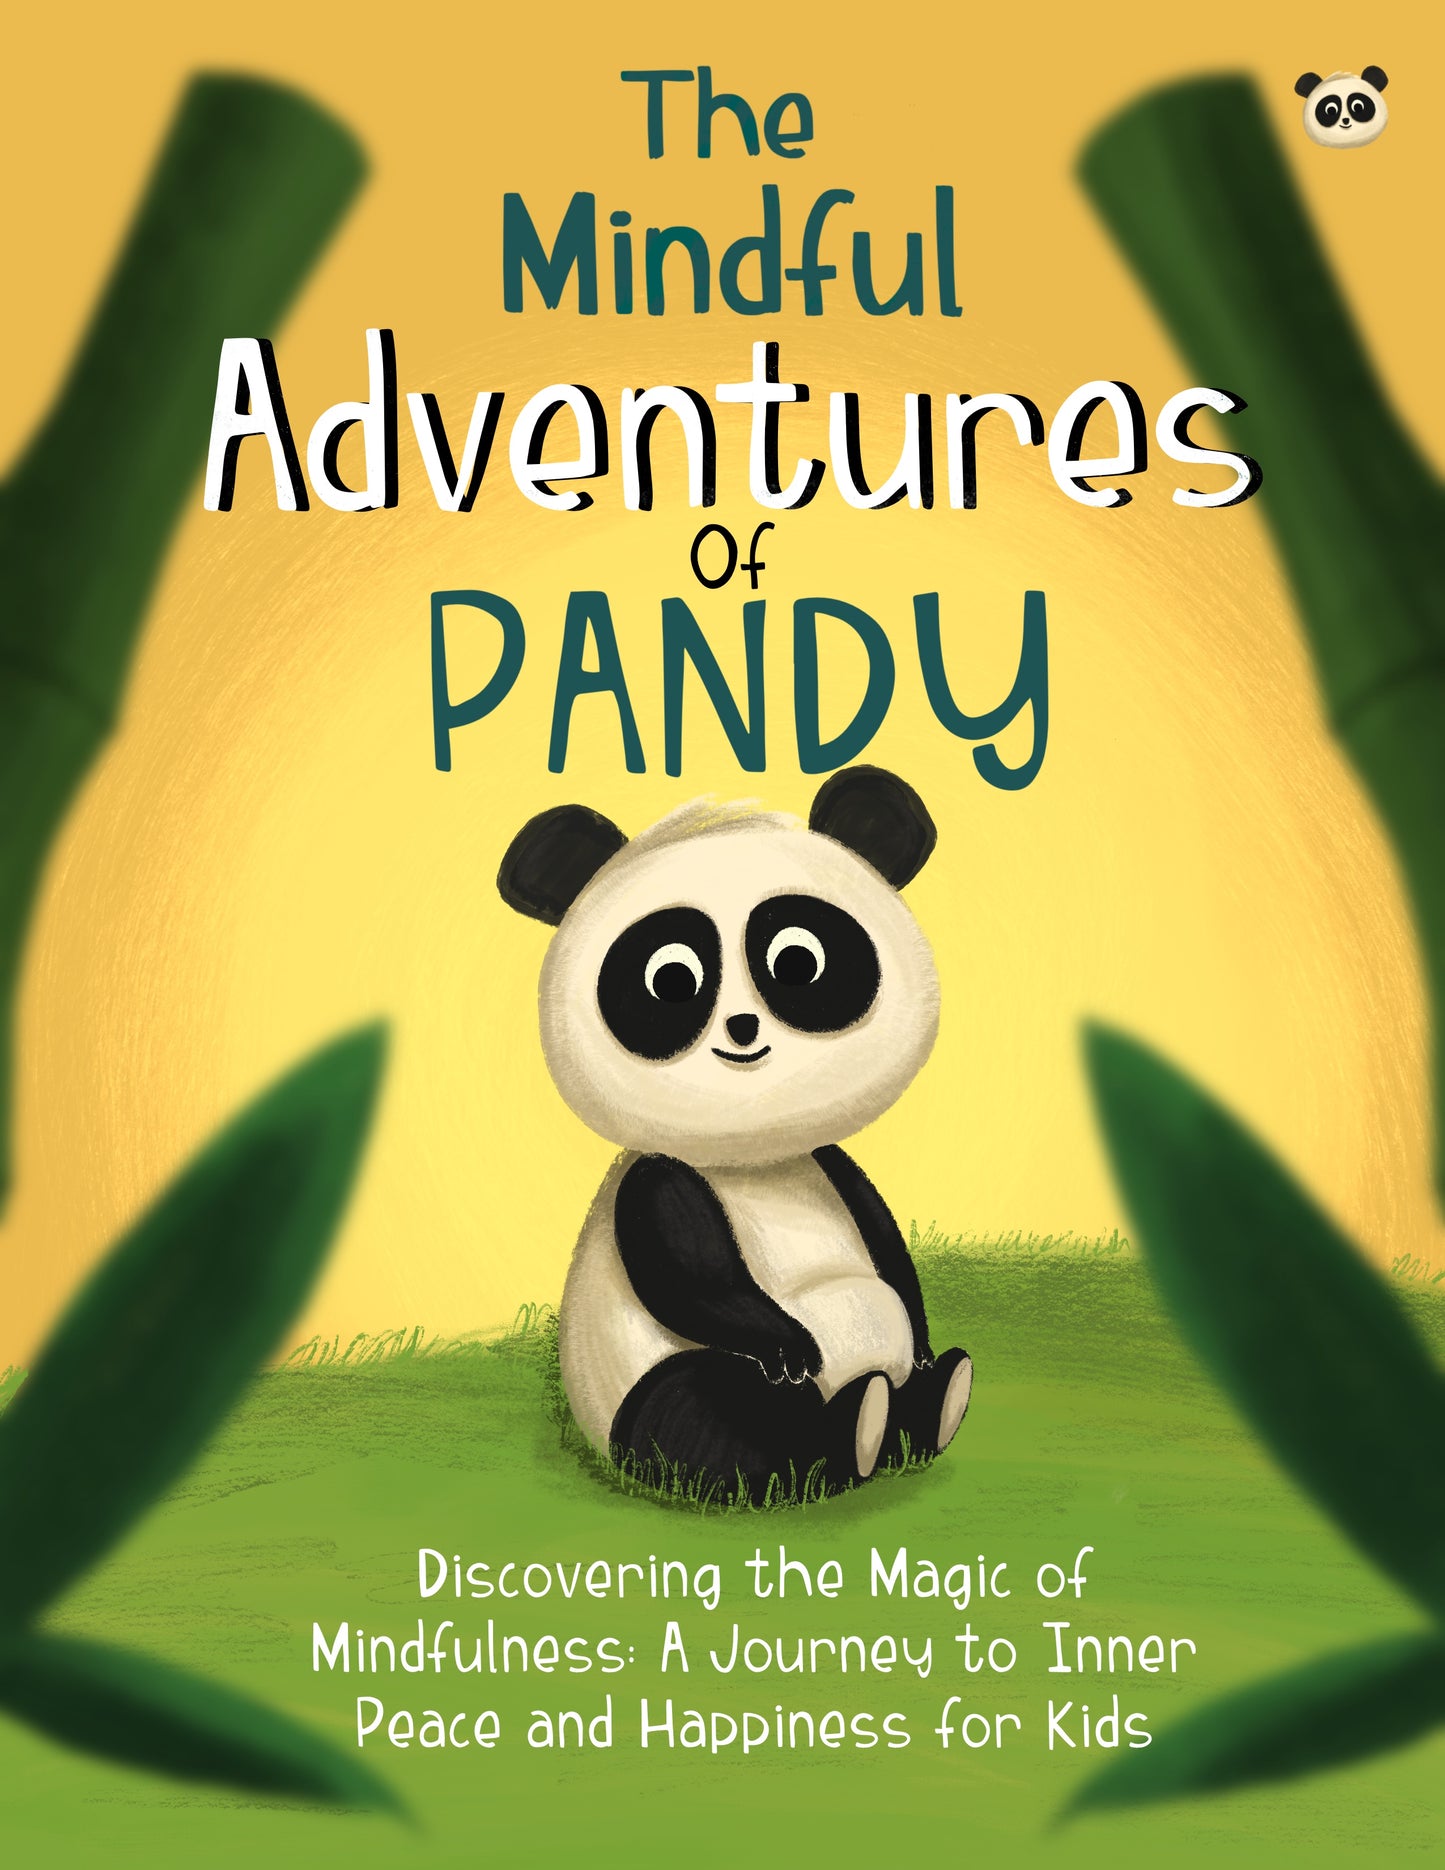 The Mindful Adventures of Pandy: Discovering the Magic of Minfulness - A Journey to Inner Peace and Happiness for Kids